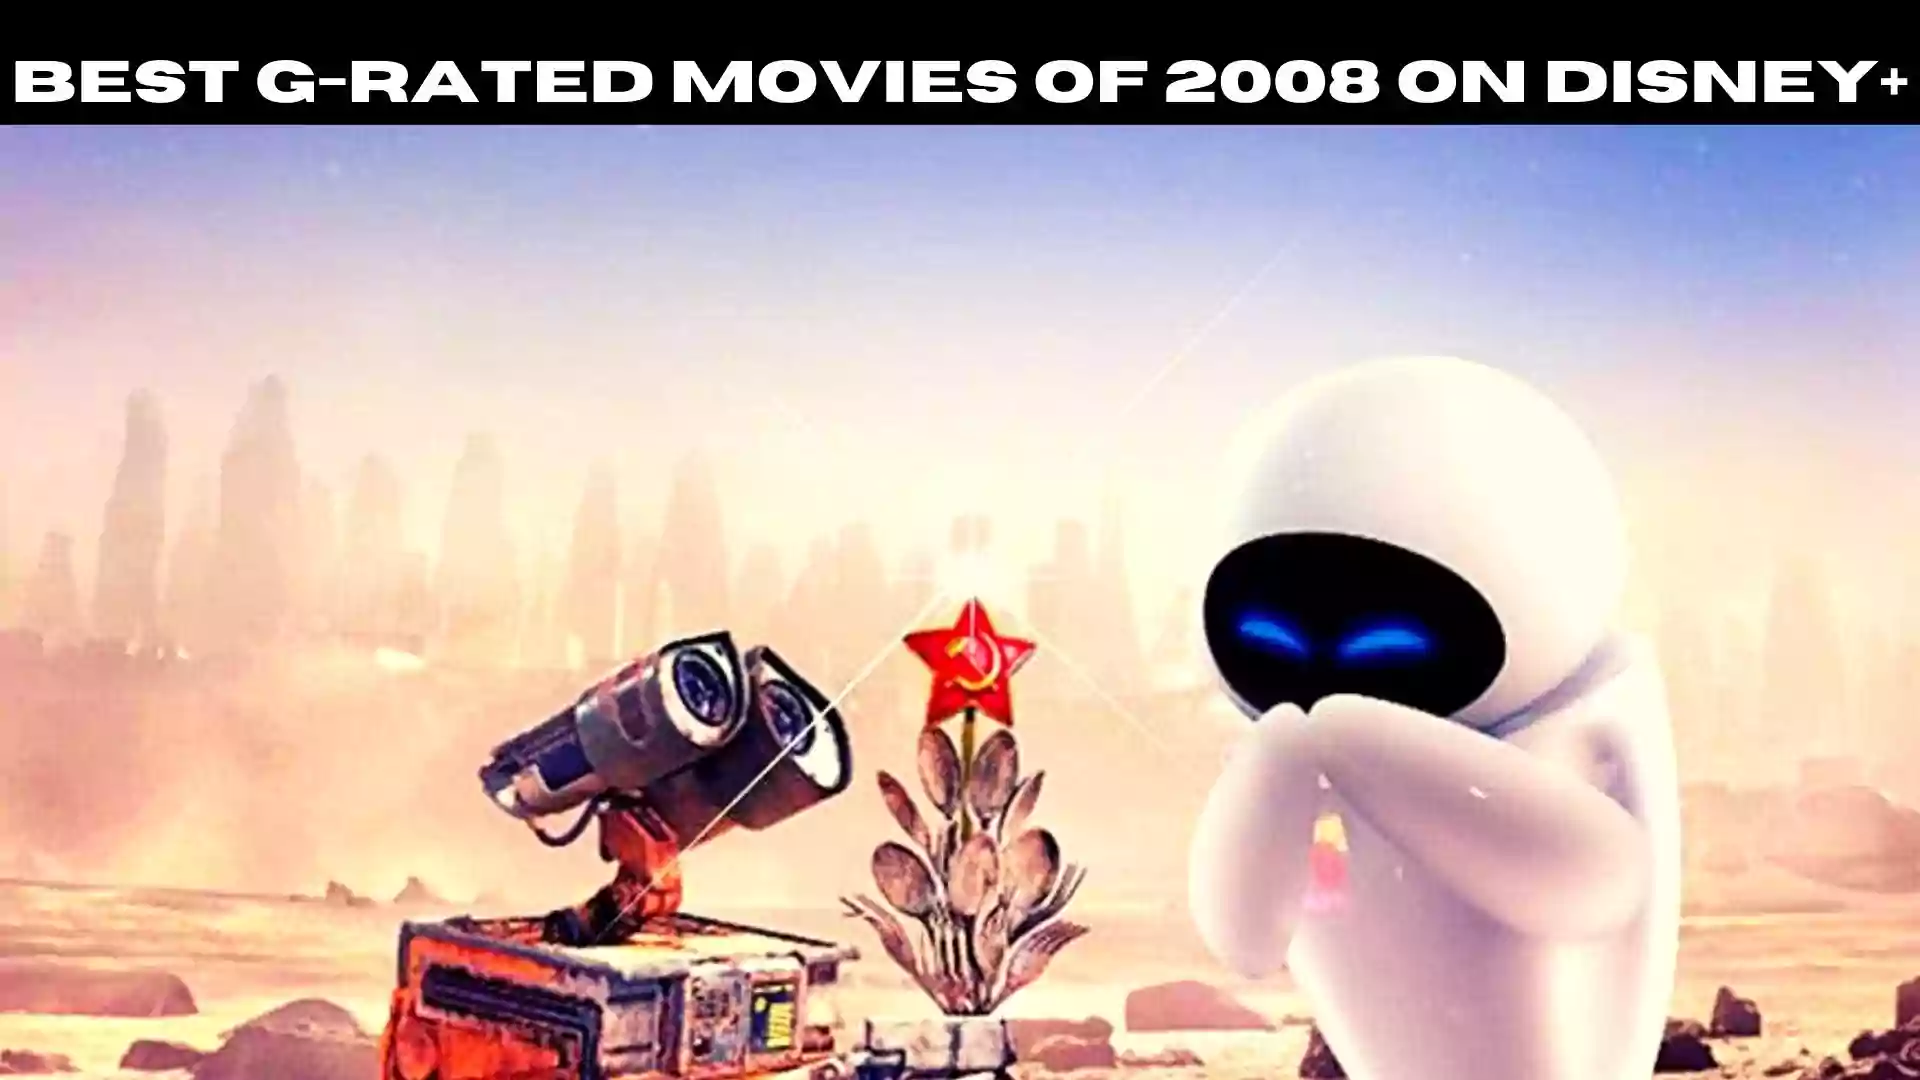 Best G-Rated Movies of 2008 on Disney+